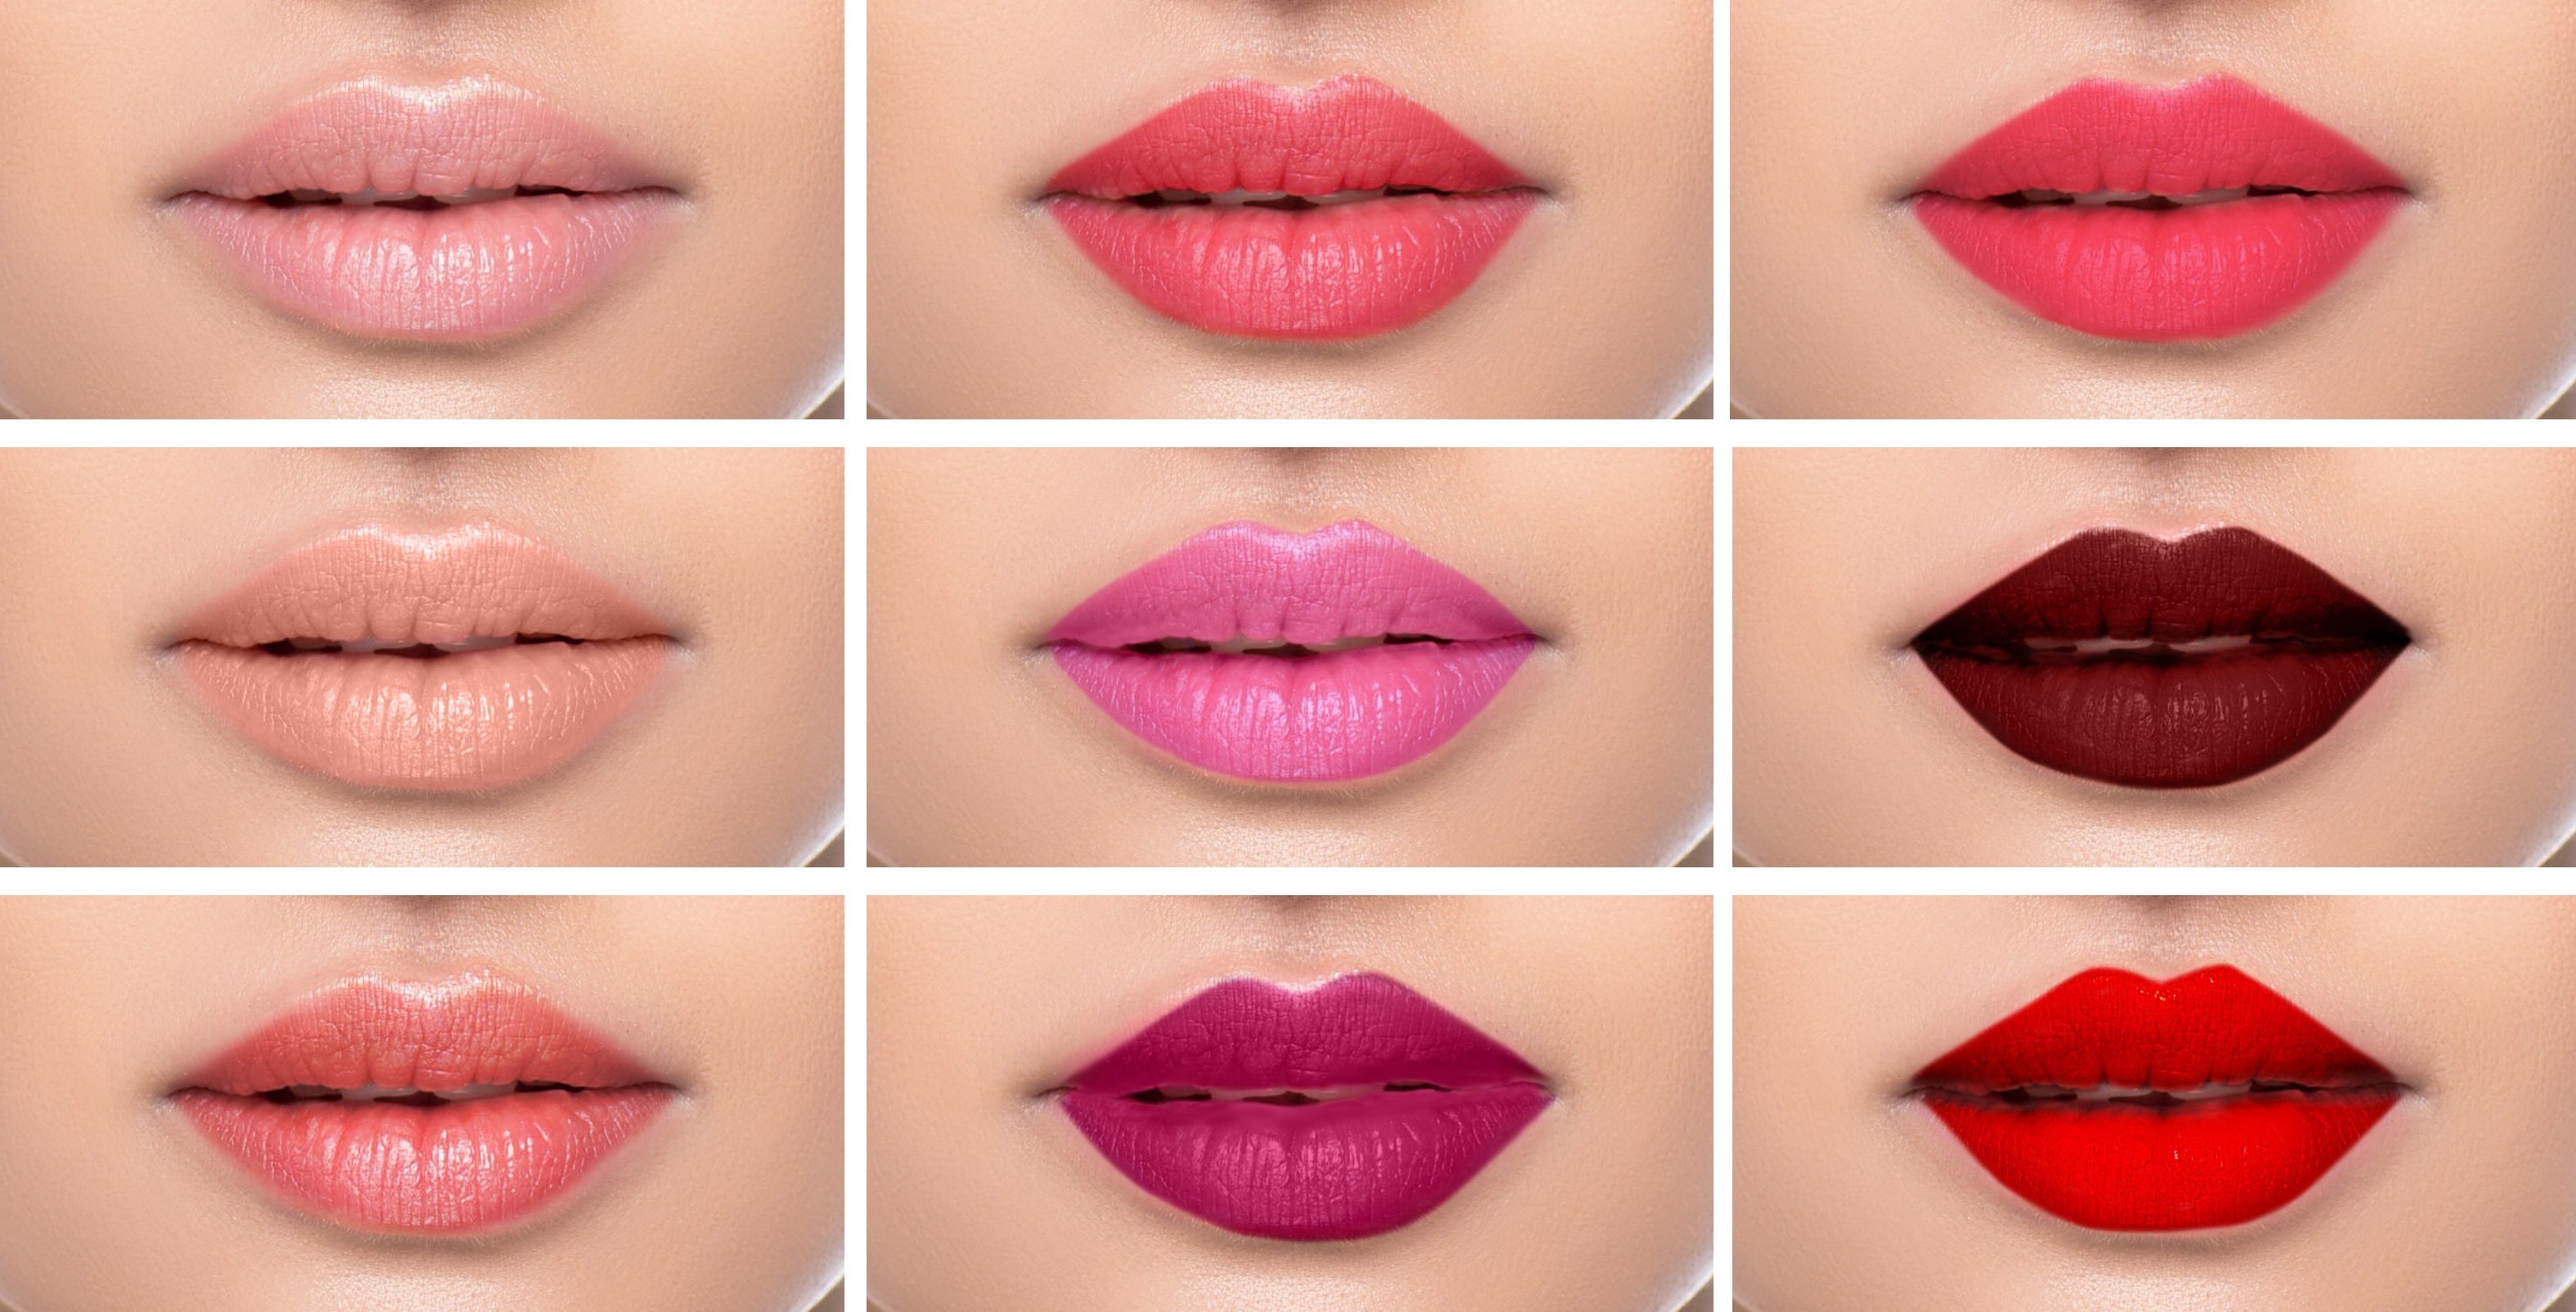 Resignation at opfinde hun er Tips for choosing the right lipstick shade according to your skin tone